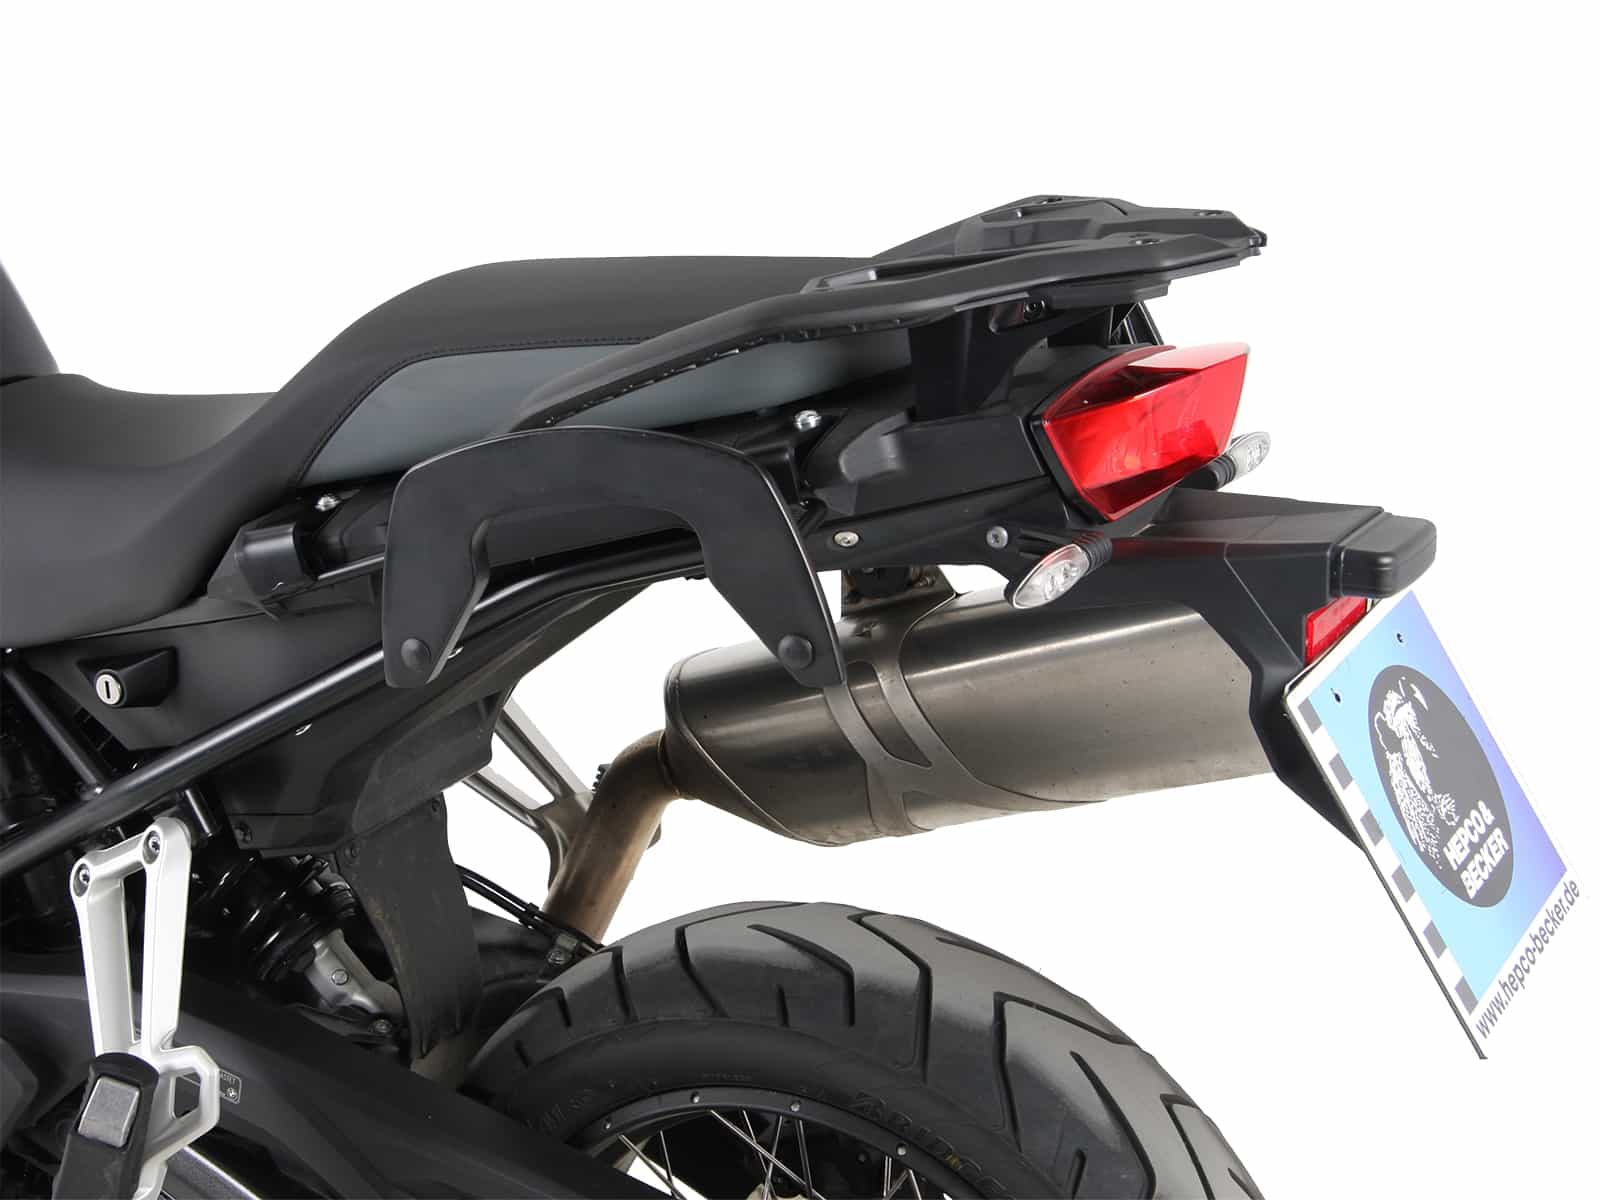 C-Bow sidecarrier for BMW F 750 GS (2018-)